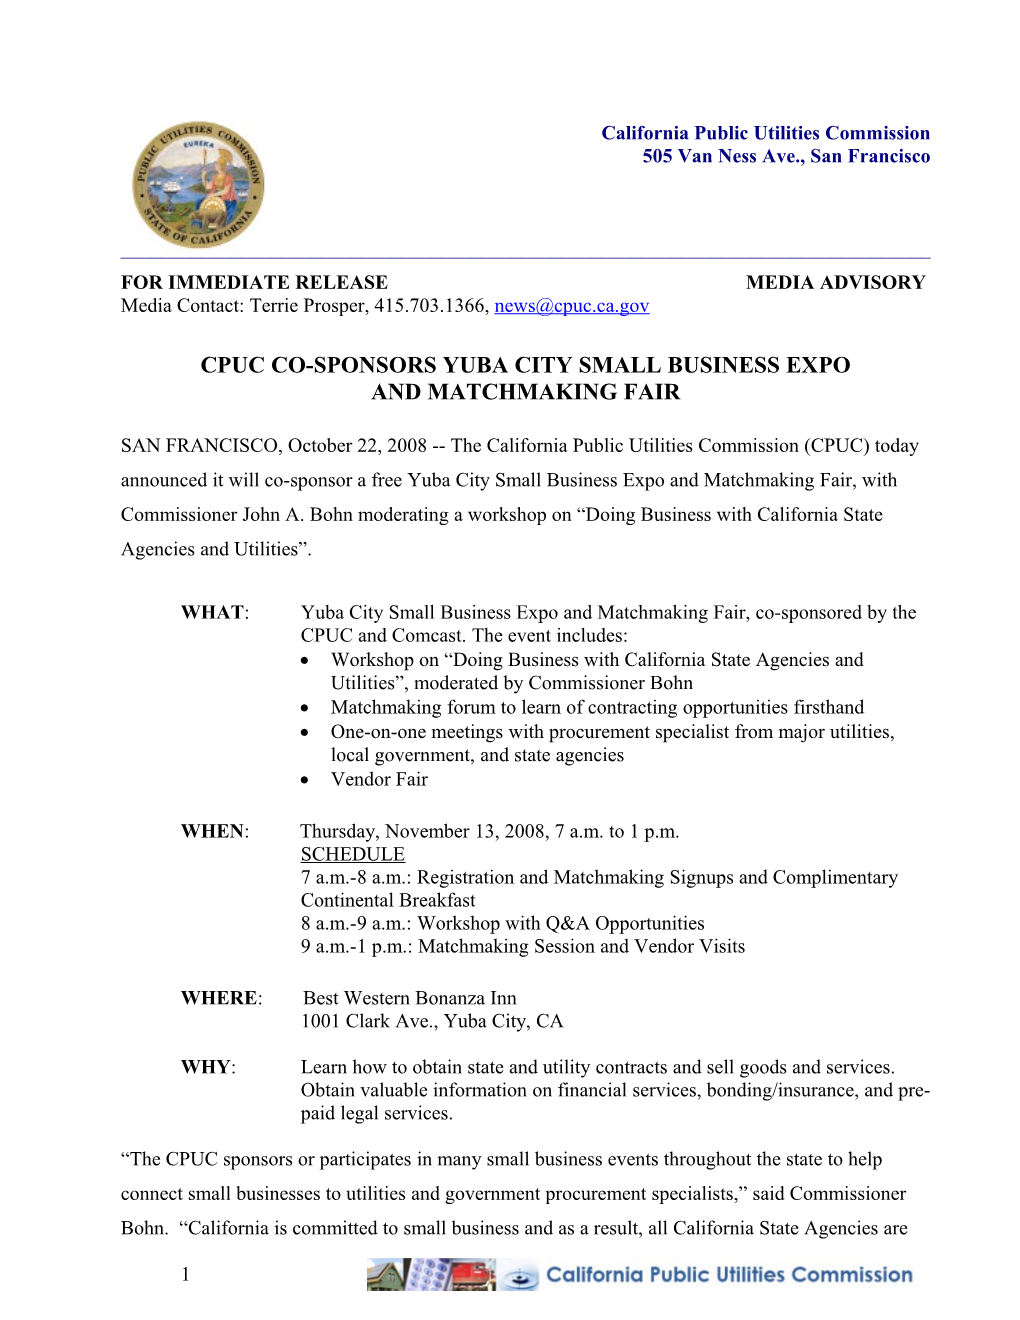 Cpuc Co-Sponsors Yuba City Small Business Expo and Matchmaking Fair